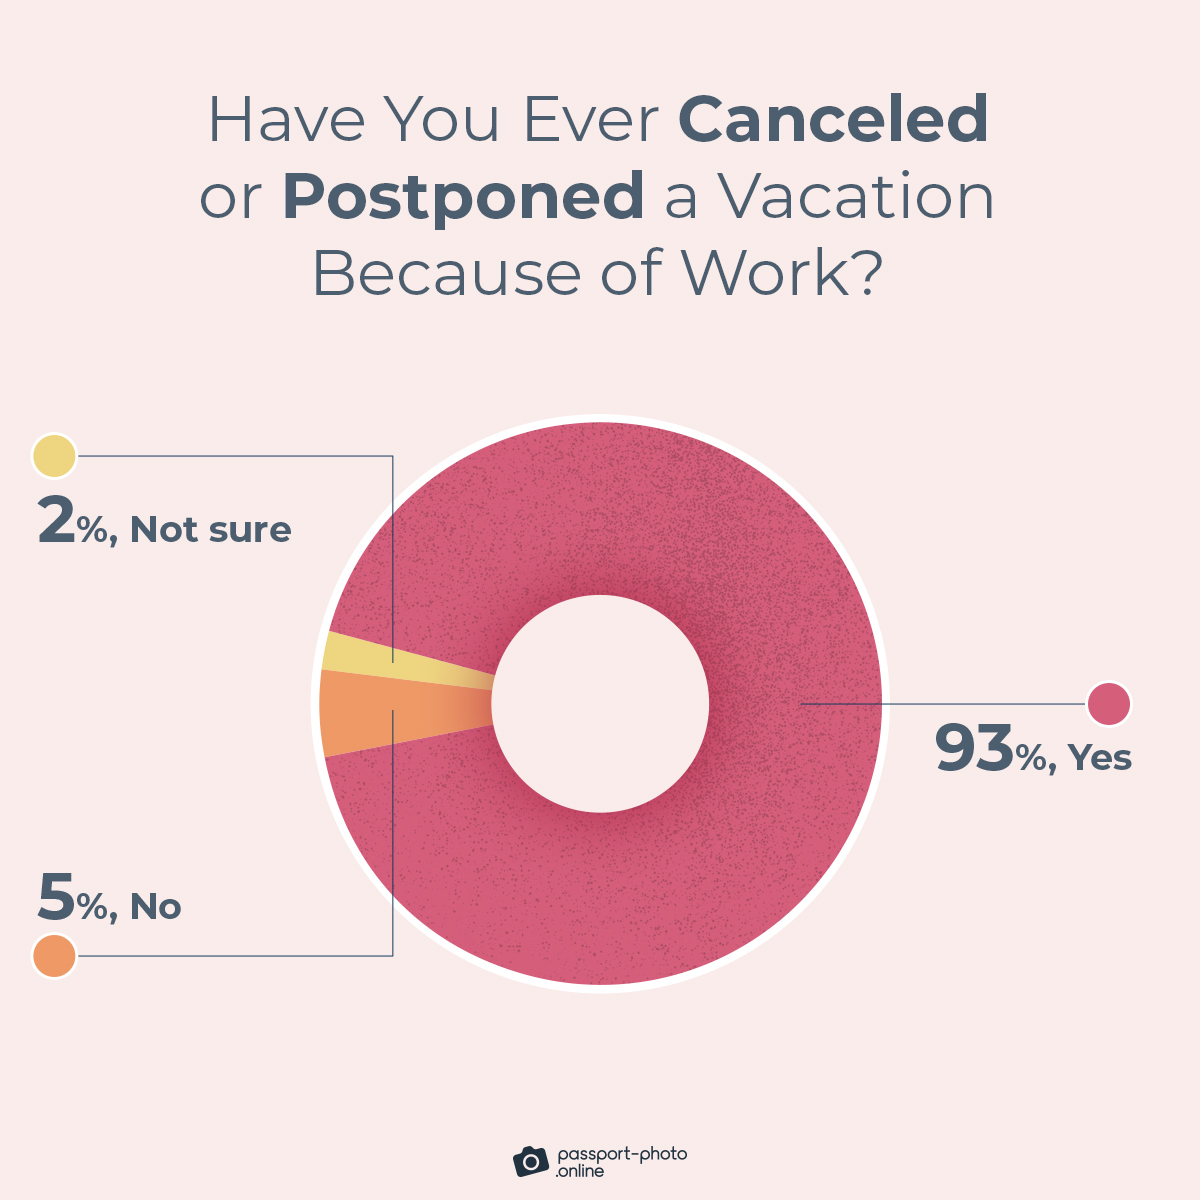 93% admit they’ve canceled OR postponed a vacation because of work at least once in their lifetime